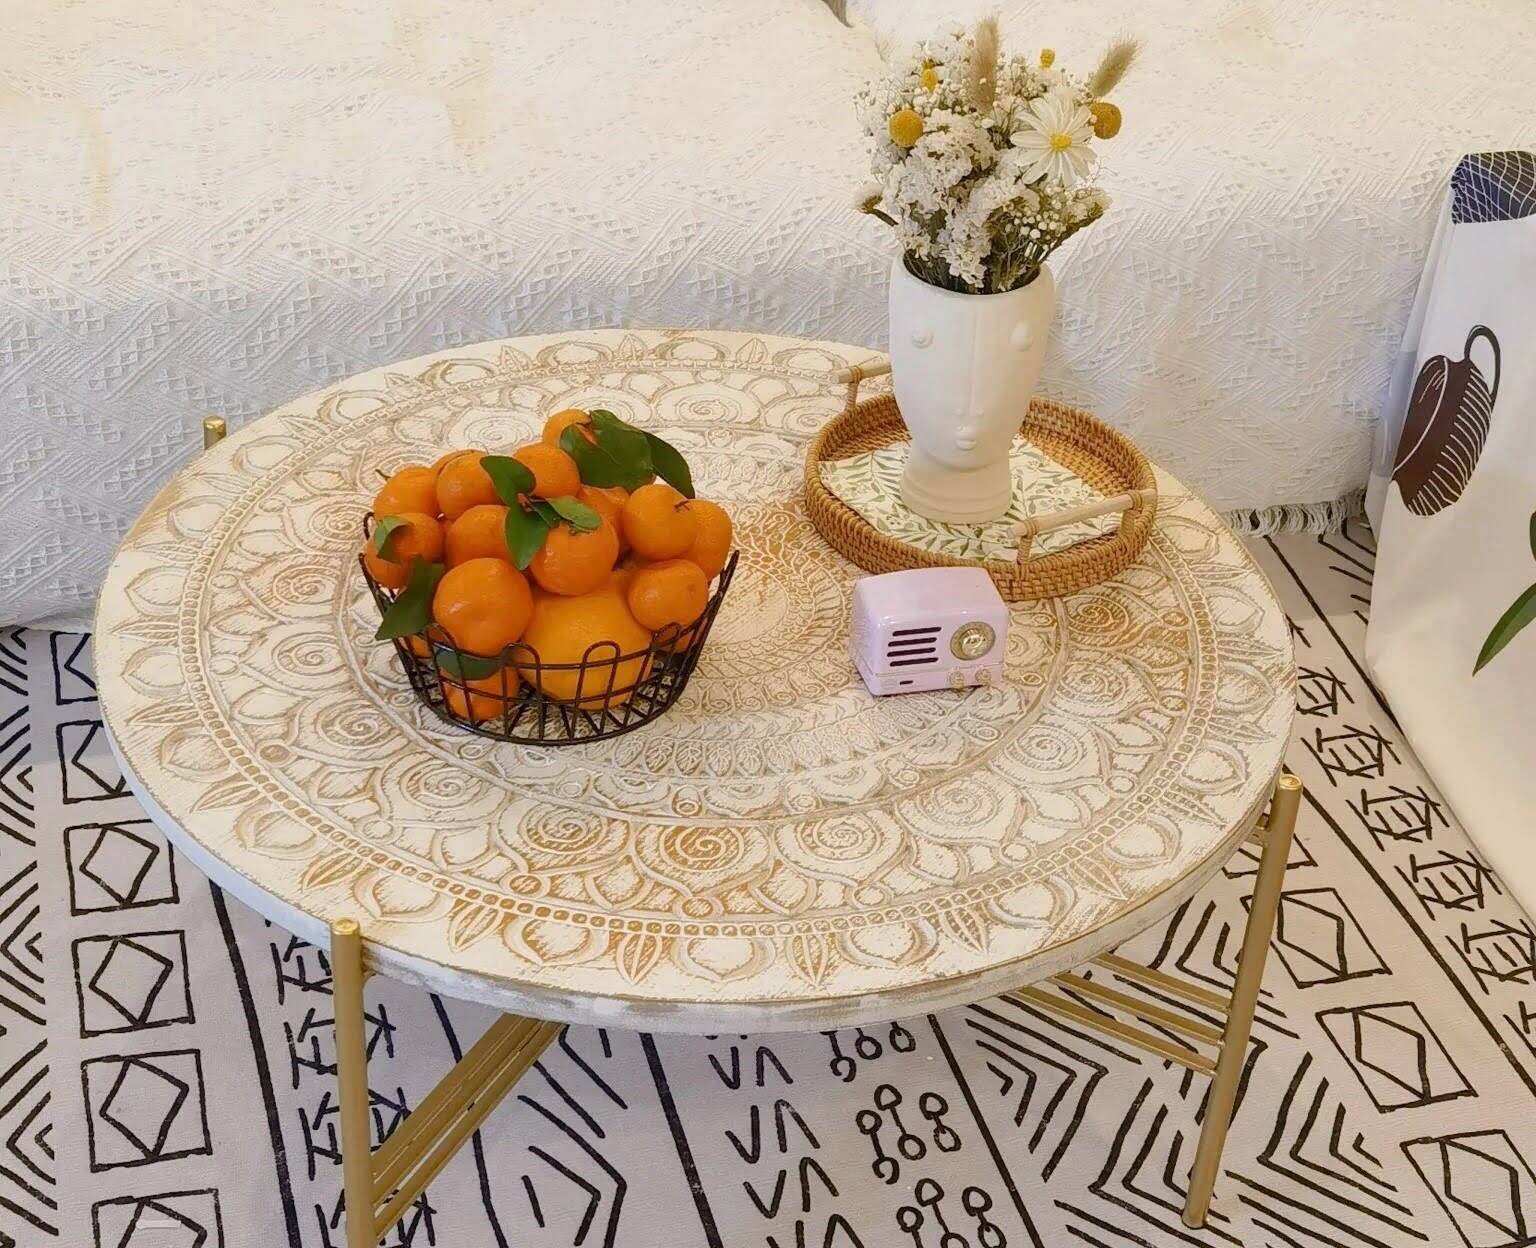 How To Decorate A Table In Moroccan Style On A Budget